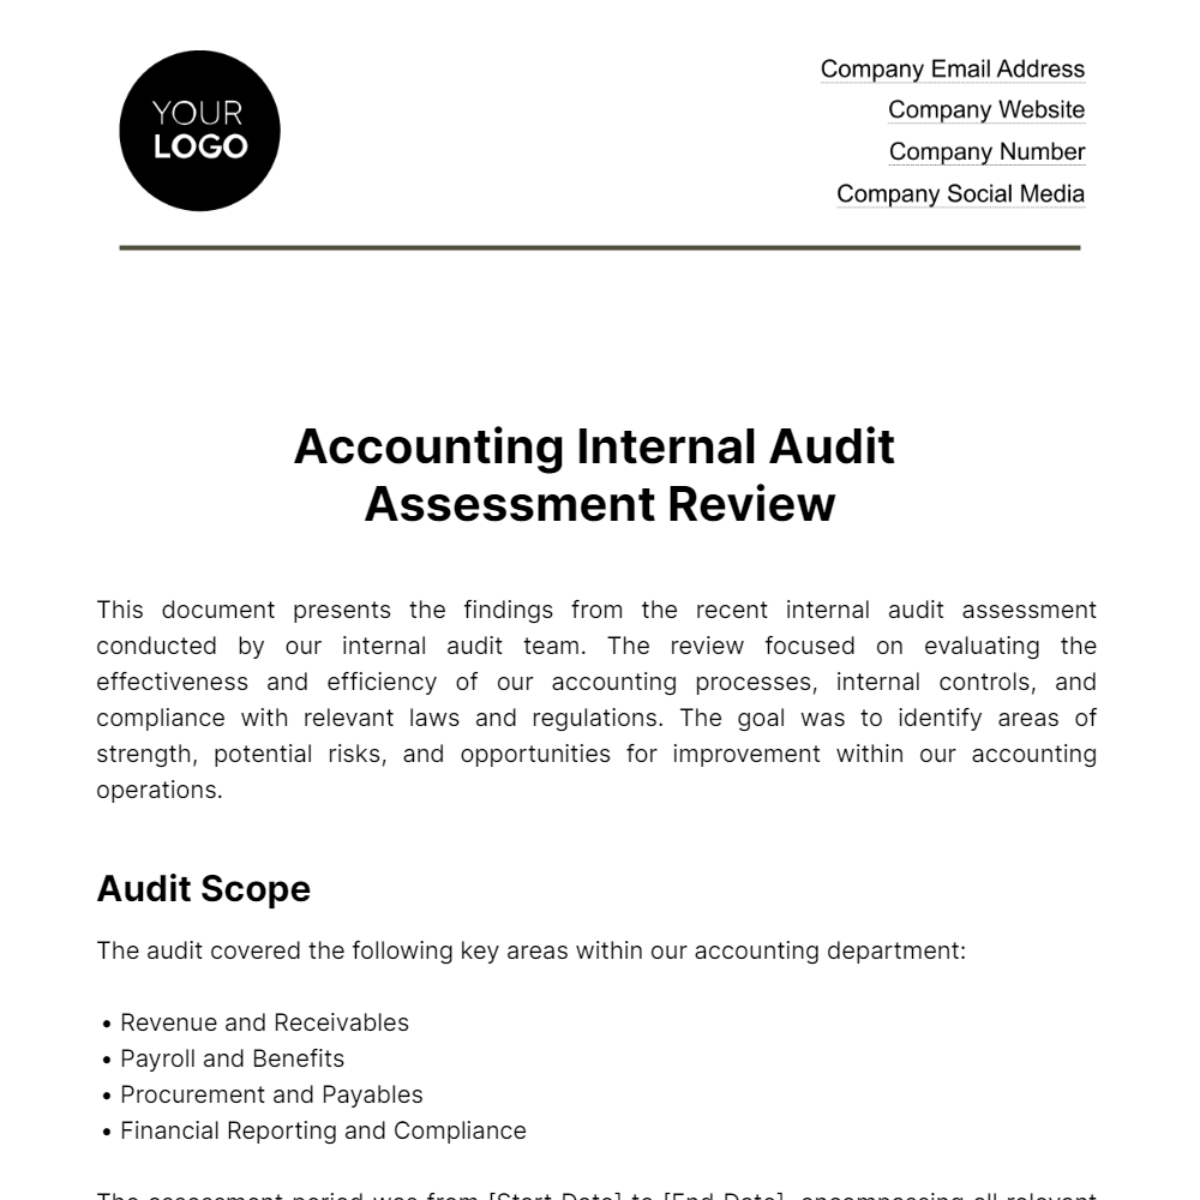 Accounting Internal Audit Assessment Review Template